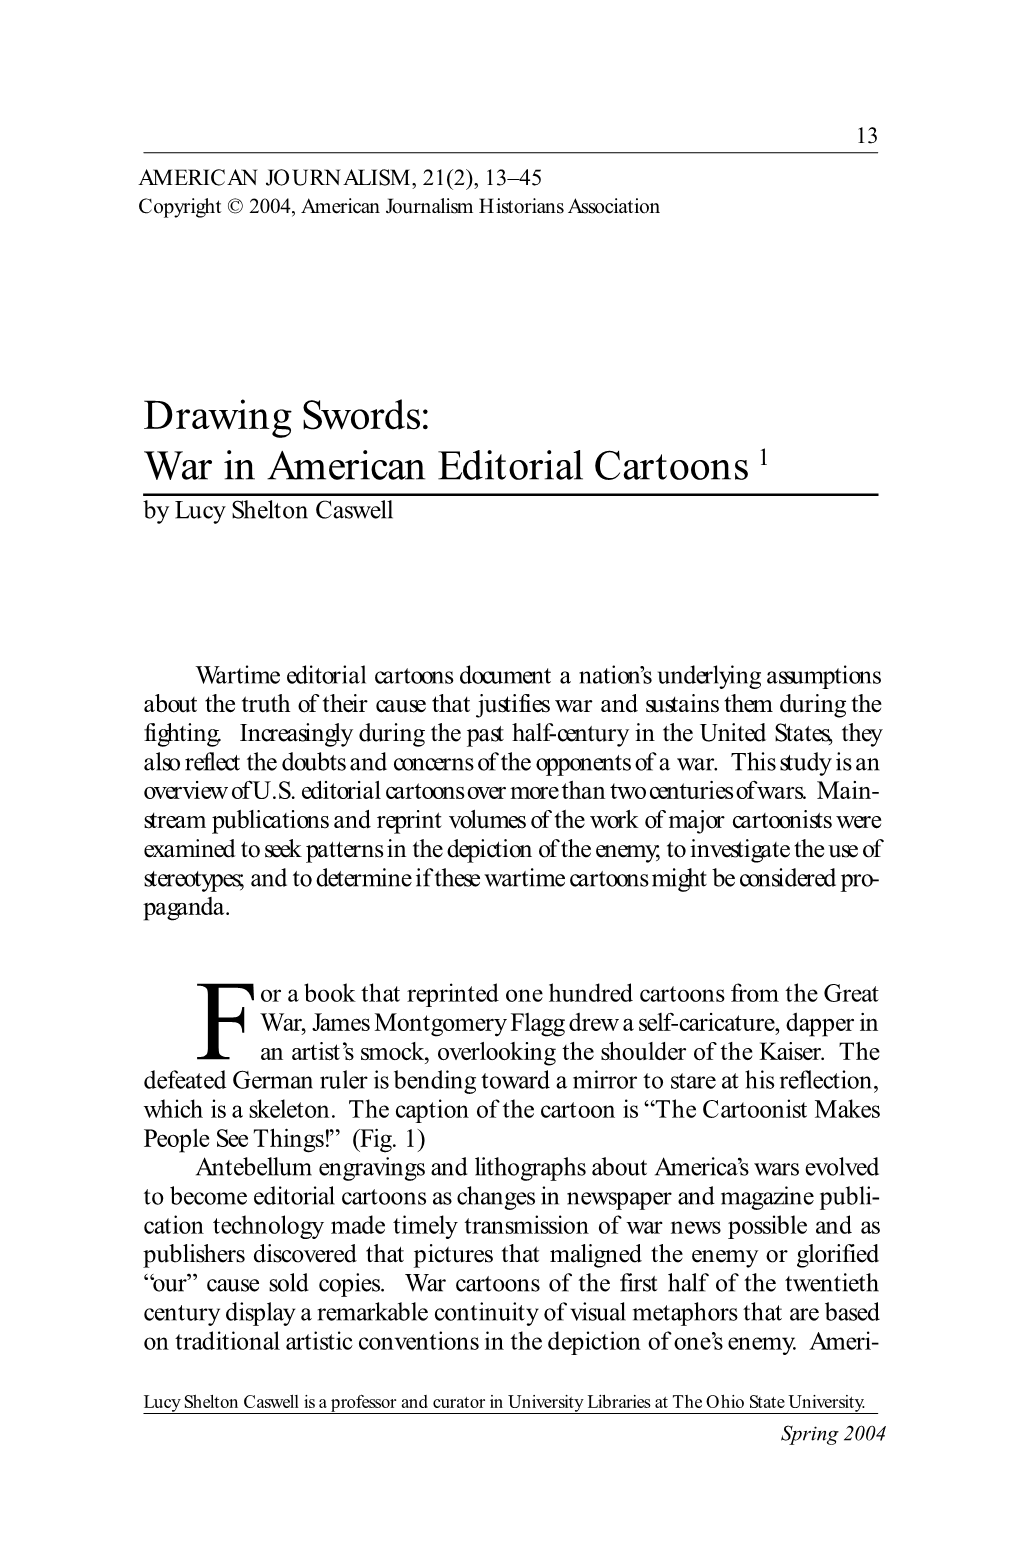 Drawing Swords: War in American Editorial Cartoons 1 by Lucy Shelton Caswell